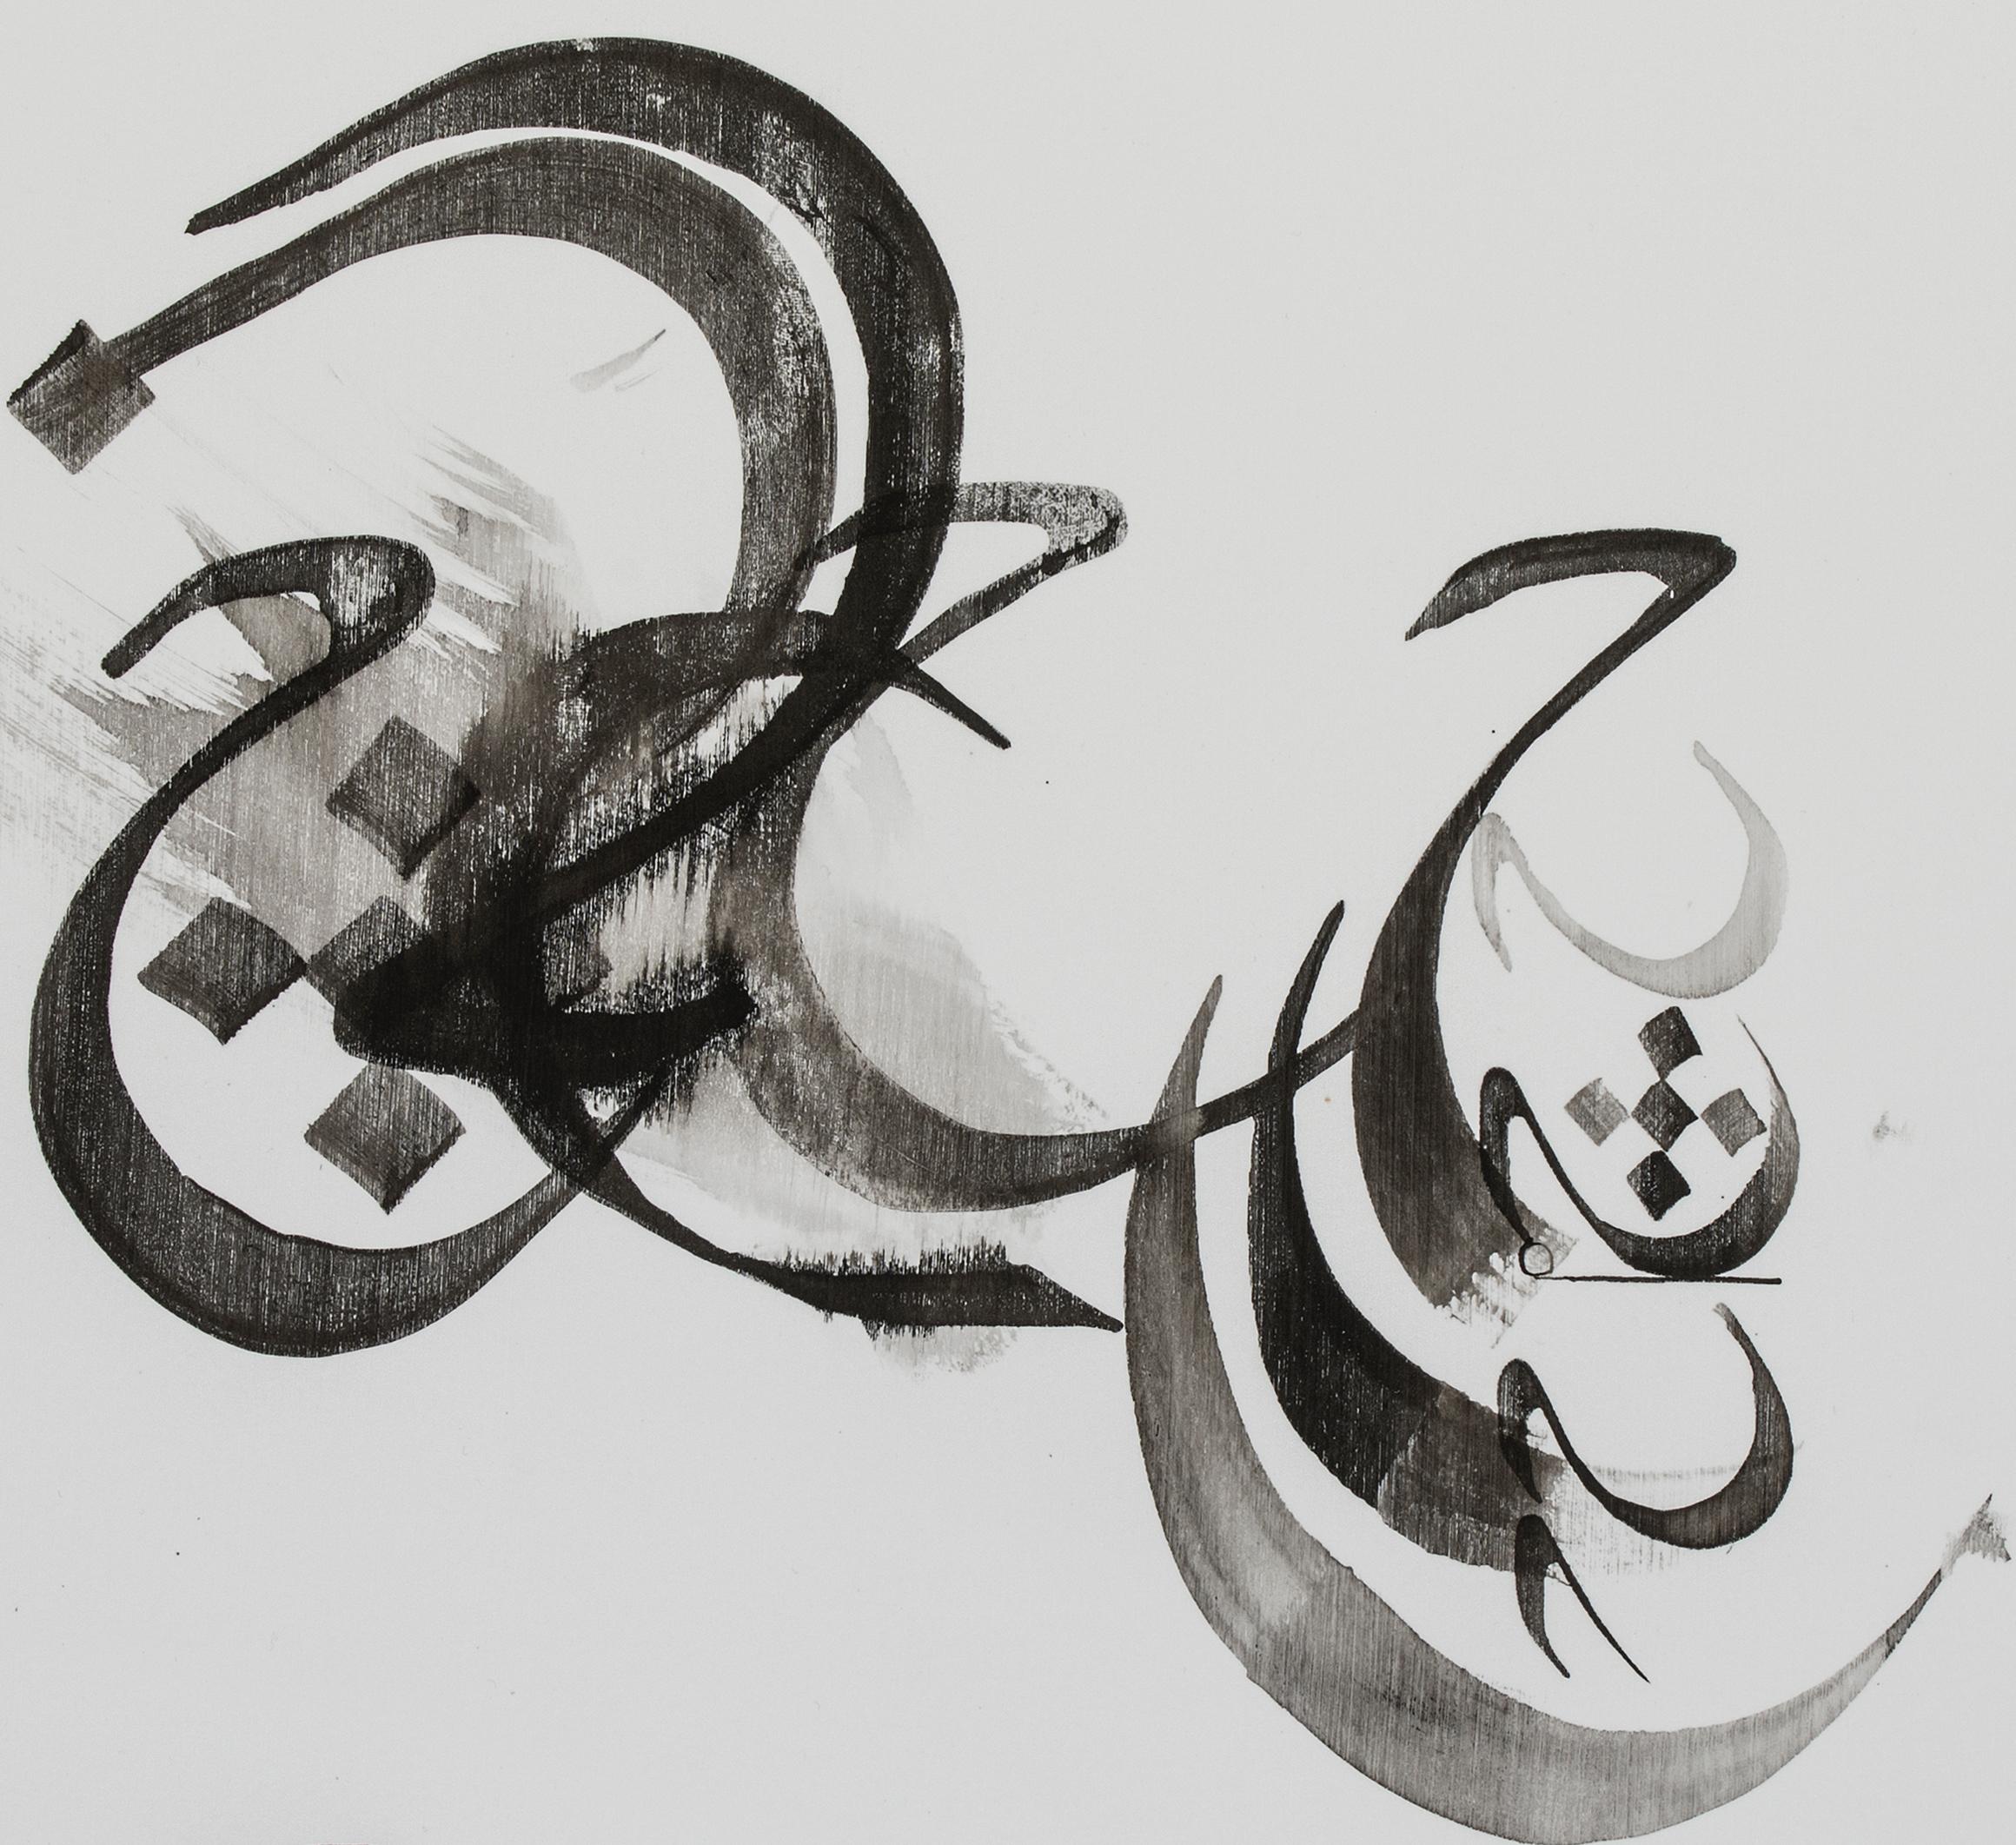 Etude 6 - abstract calligraphy ink drawing / painting on paper, in black & white - Painting by Nazanin Moghbeli